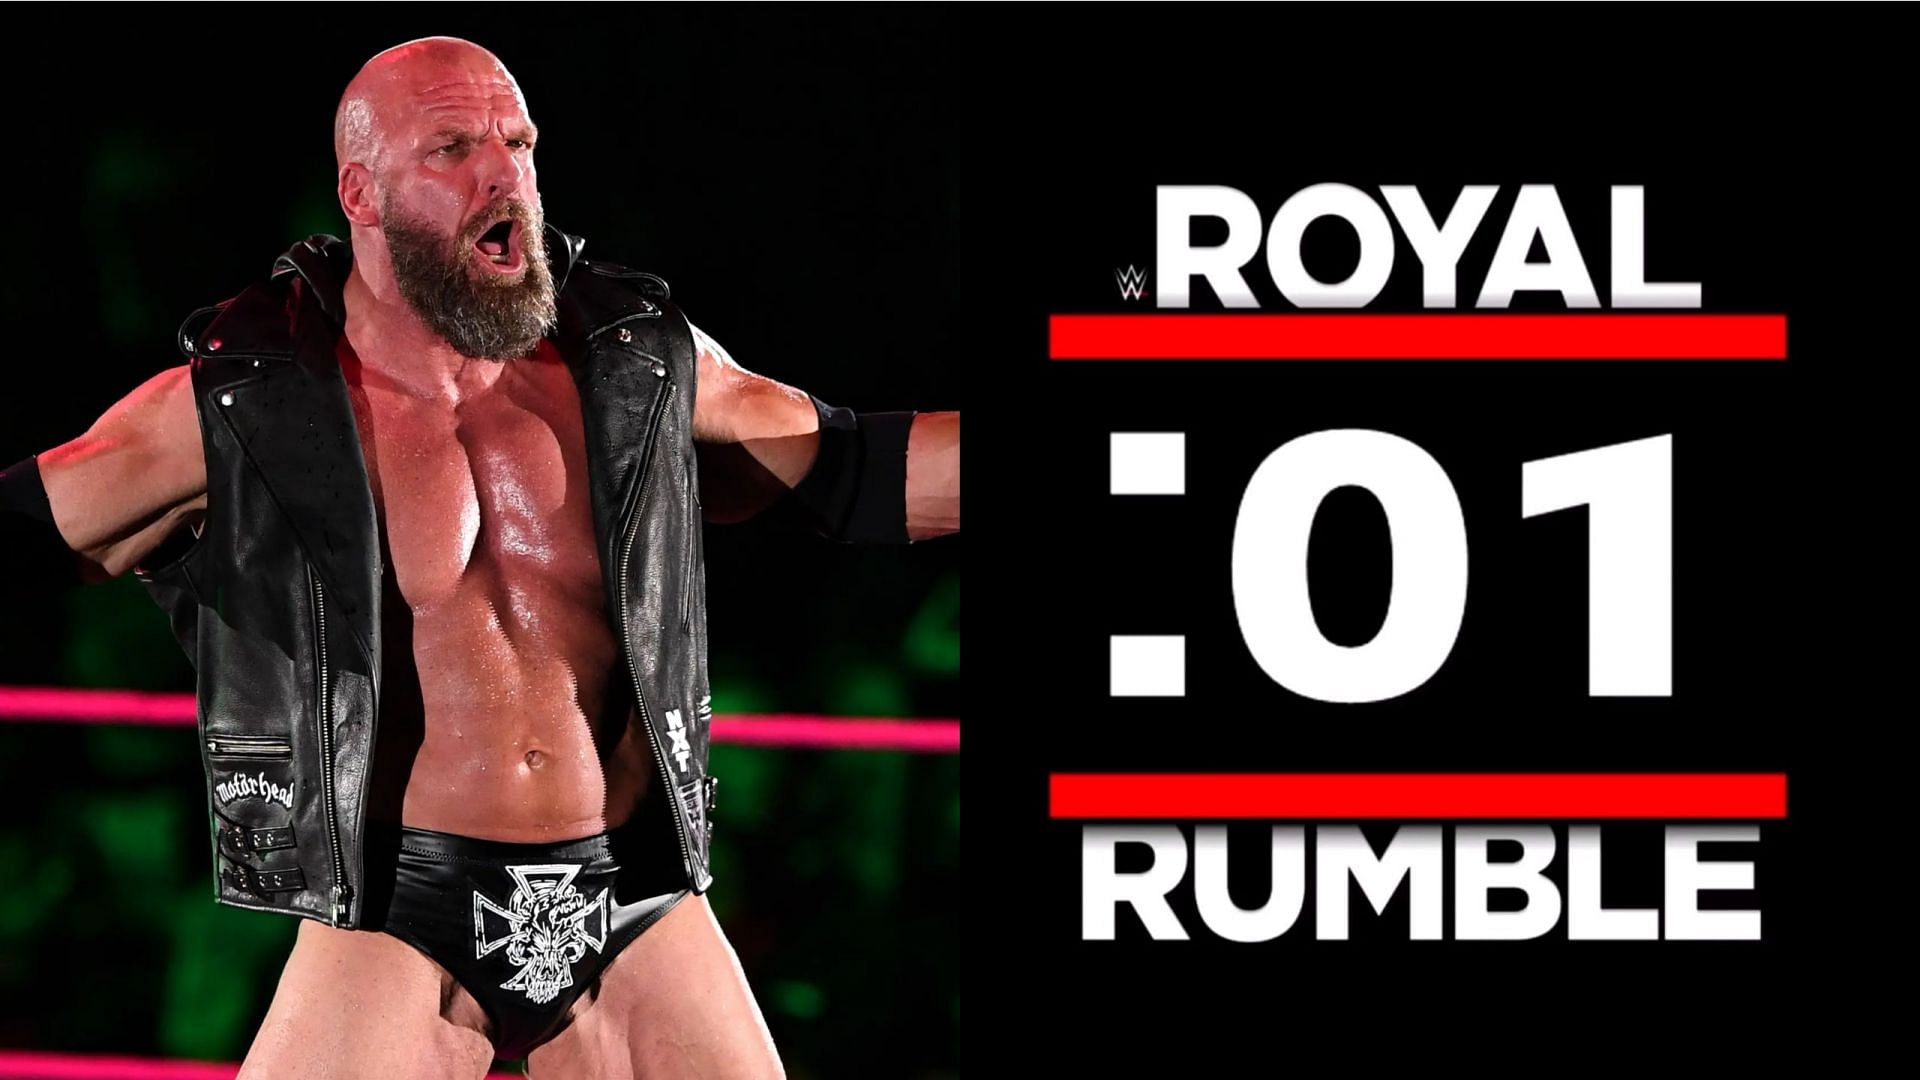 What surprises could Triple H have in store for the fans at the Royal Rumble?